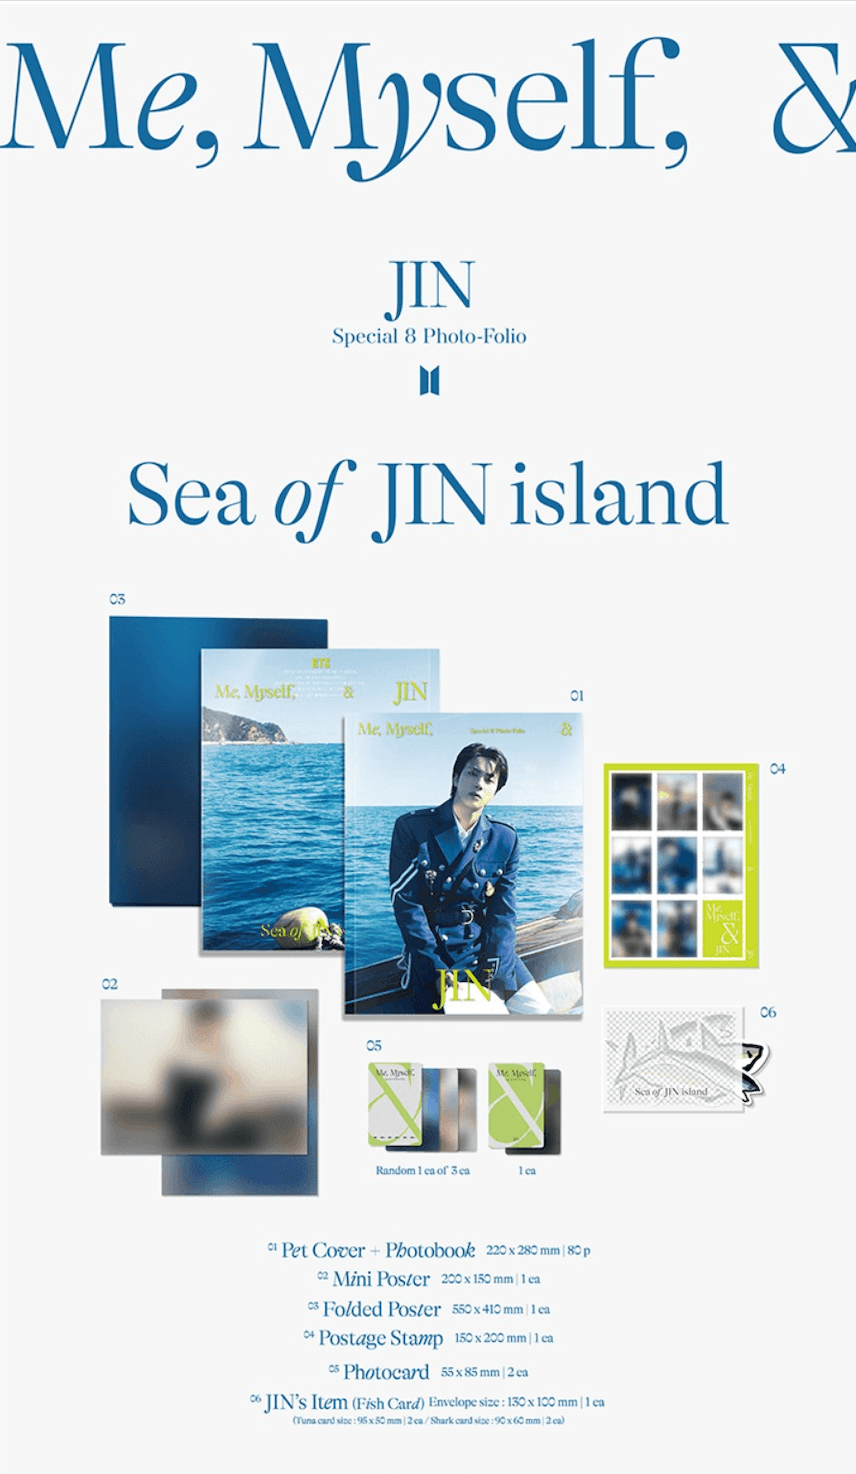 BTS - SPECIAL 8 PHOTO-FOLIO - ME, MYSELF, AND JIN - SEA OF JIN ISLAND - J-Store Online